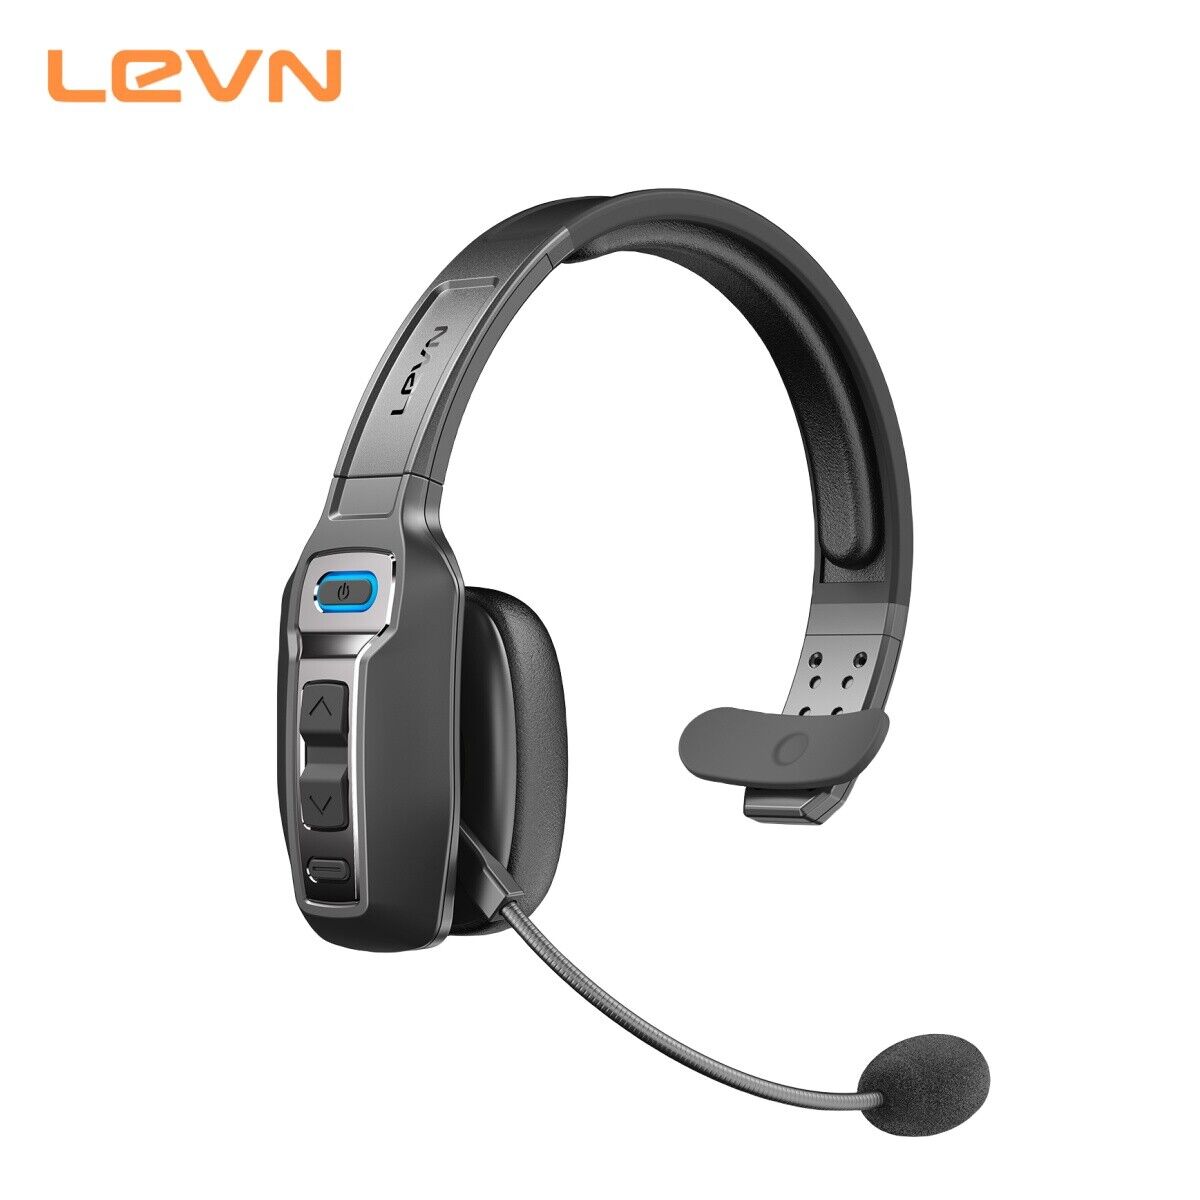 LEVN Bluetooth Headset For Trucker, Wireless Headset With Mic & Noise Cancelling